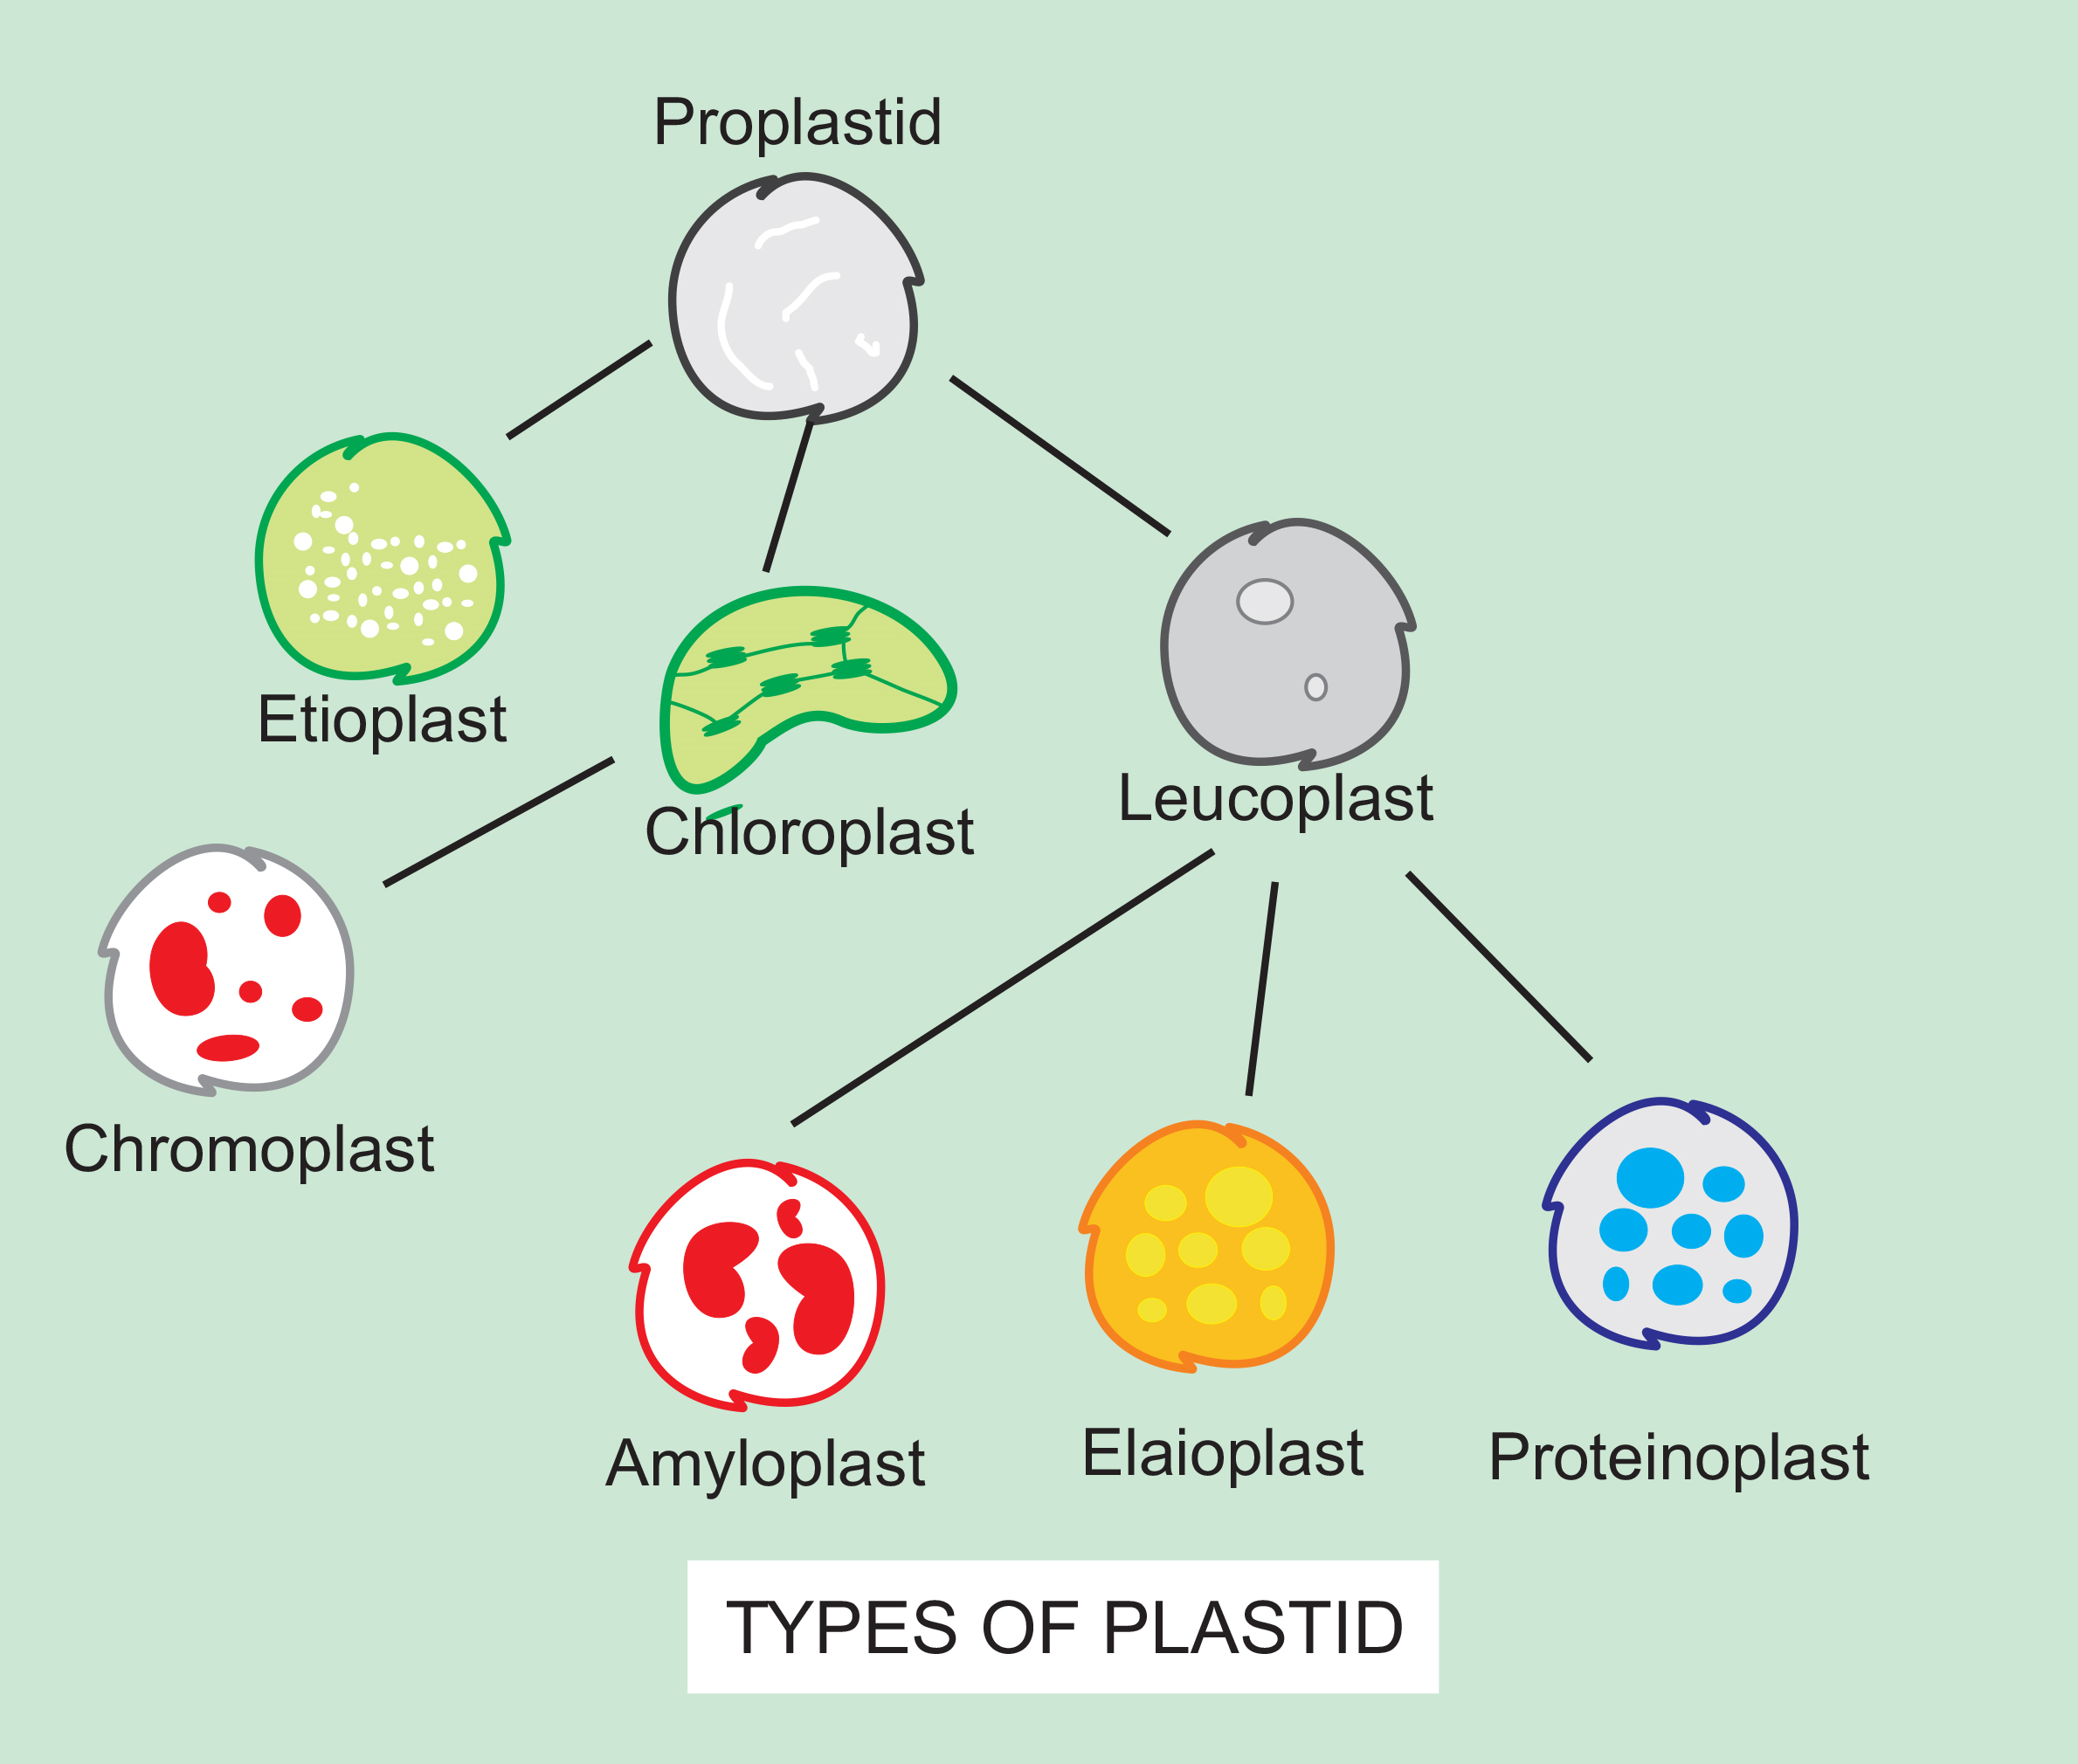 The colourless plastids are called as……………….and their main function is  …………….(a) Chloroplasts, photosynthesis(b) Leucoplasts, respiration(c)  Chromoplasts, protection from sunlight(d) Leucoplasts, storage of food